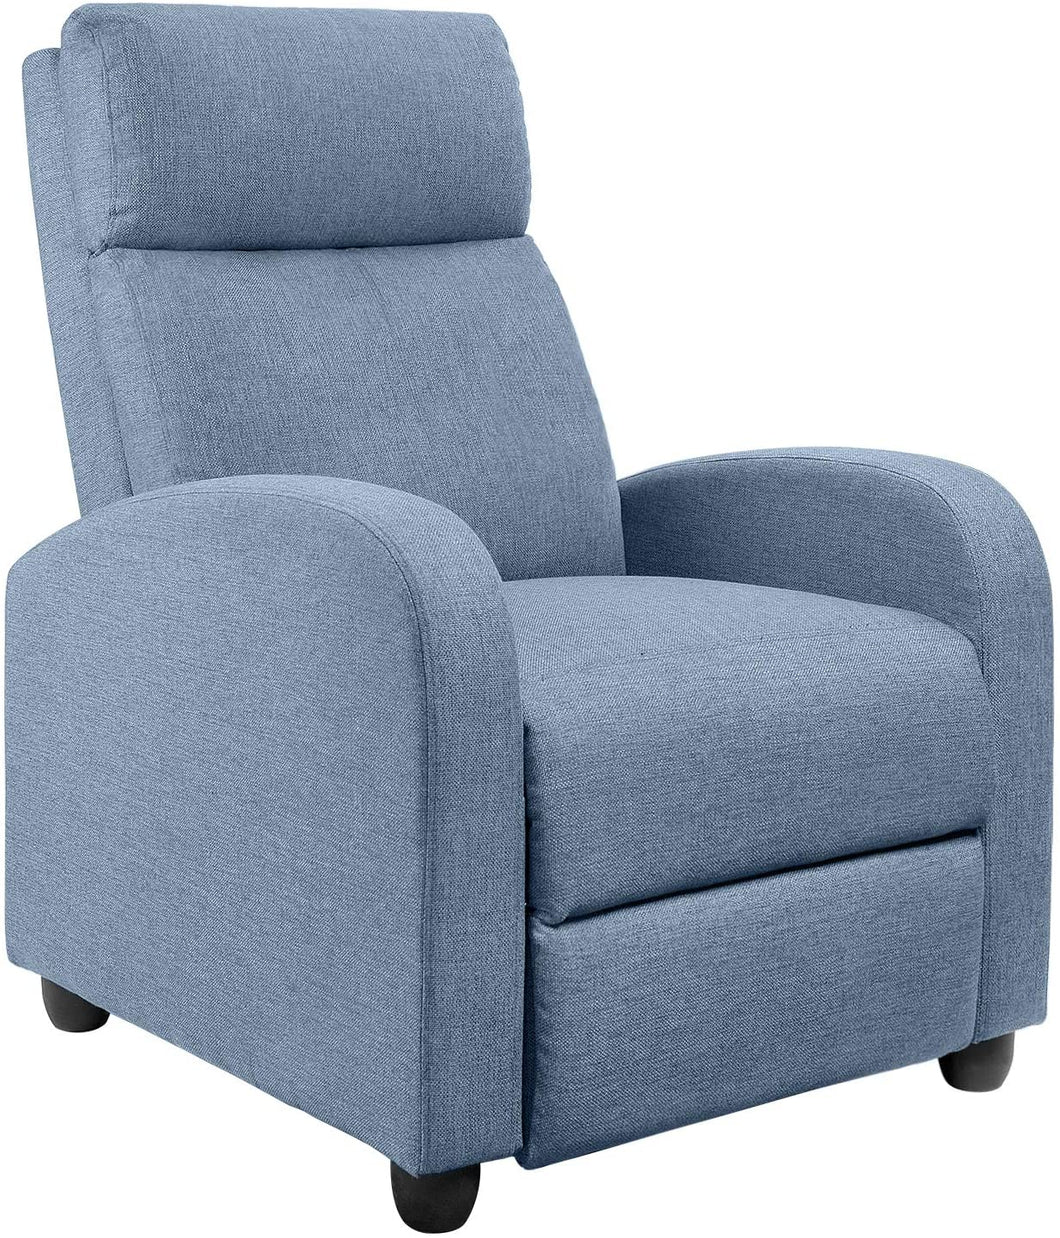 Fabric Recliner Chair Adjustable Home Theater Single Massage Recliner Sofa Furniture with Thick Seat Cushion and Backrest Modern Living Room Recliners (Light-Blue)